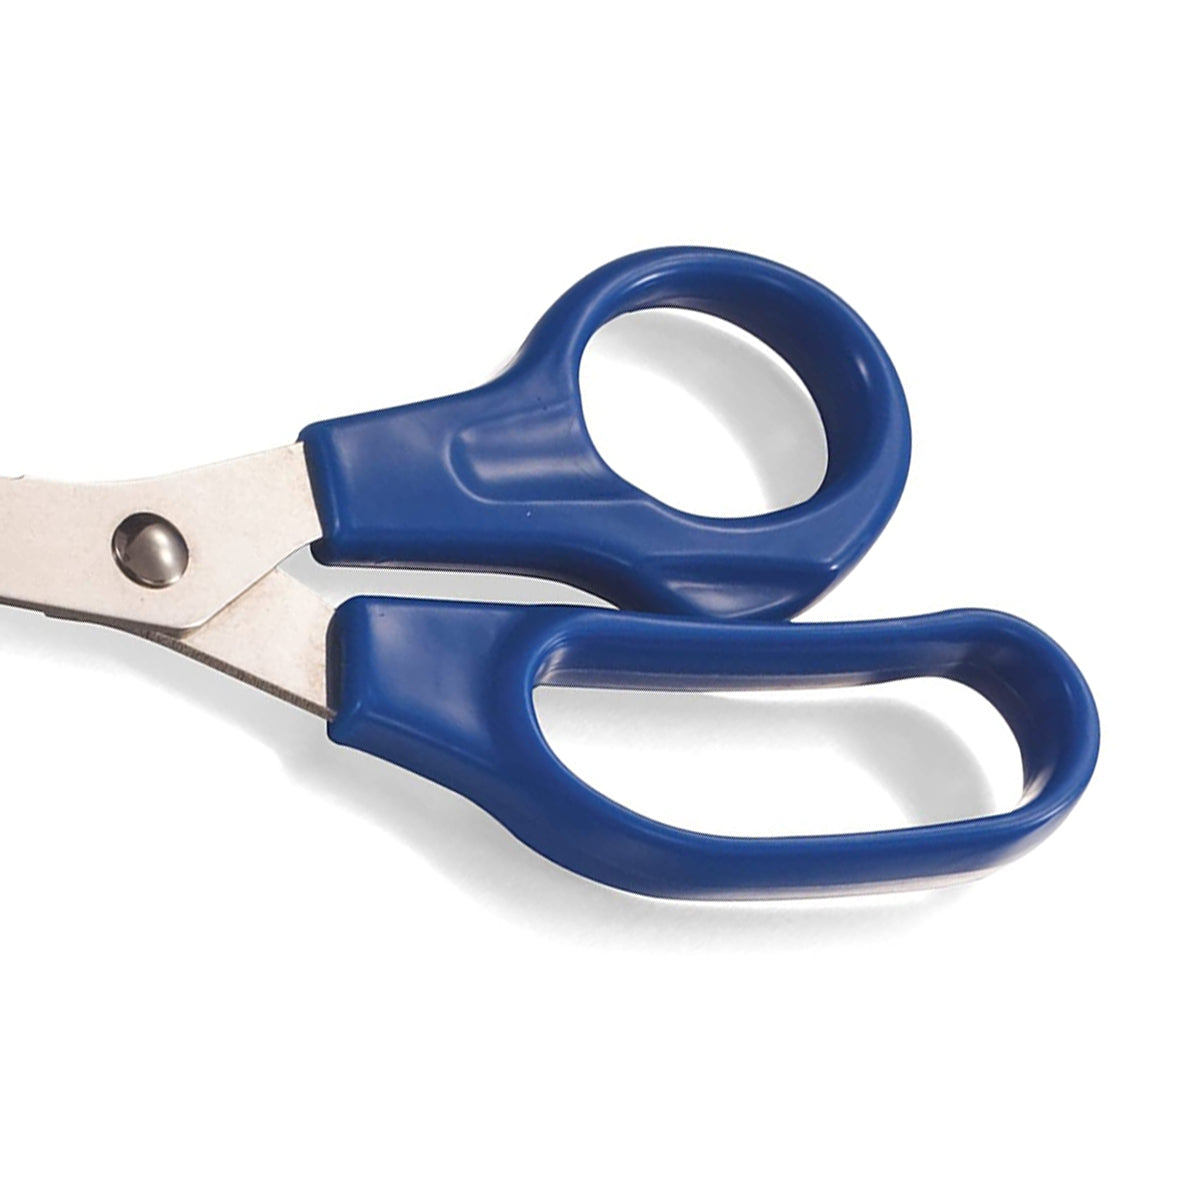 Officemate 7” Straight Stainless Steel Scissors – All-Purpose